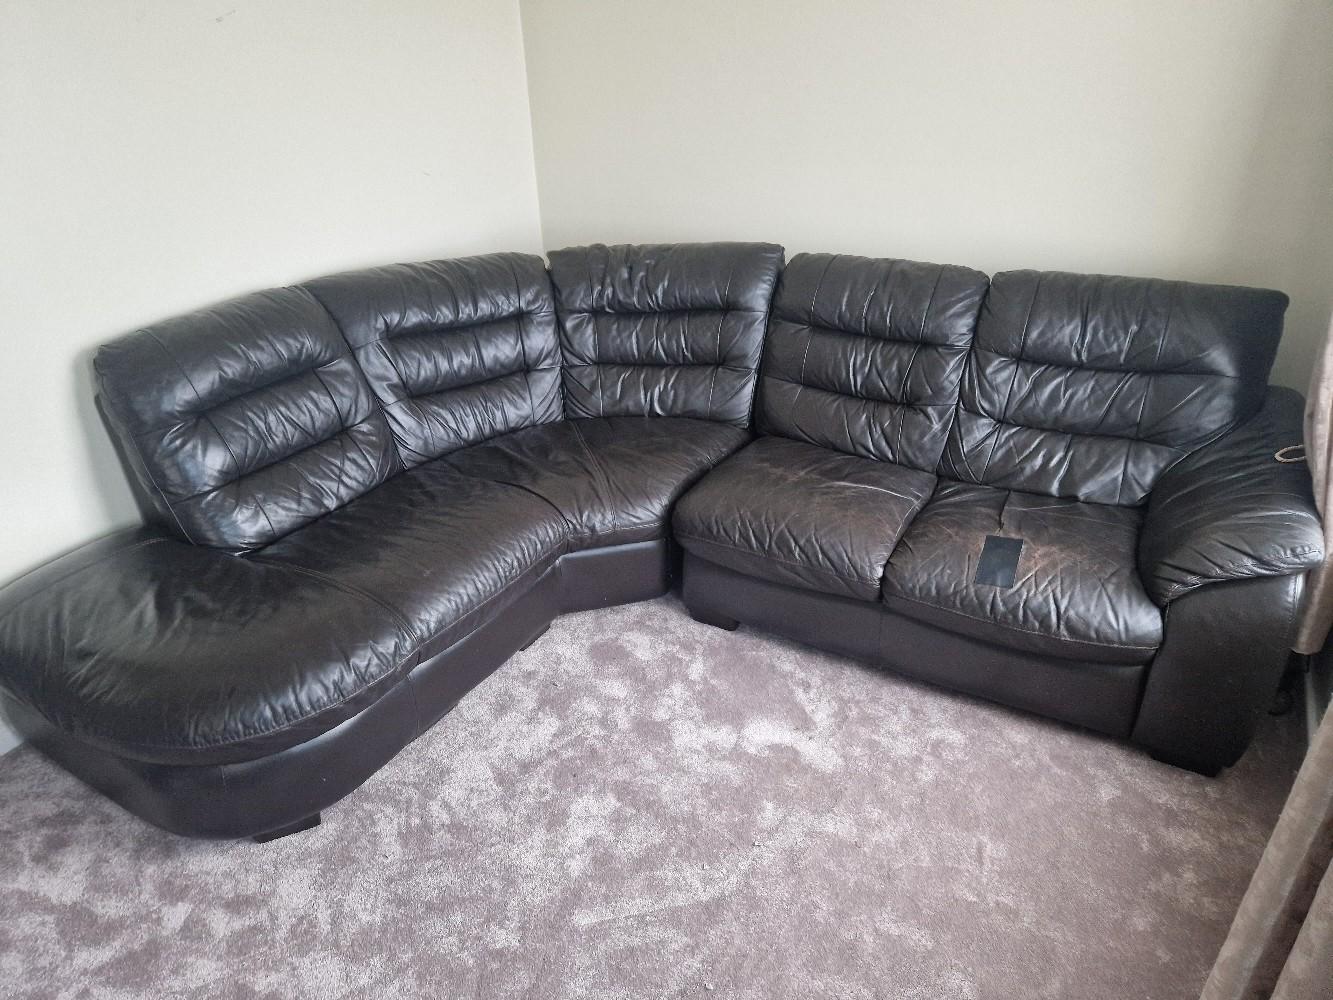 DFS California Brown Leather Modular Corner Sofa for Sale in Worthing, West  Sussex Classified